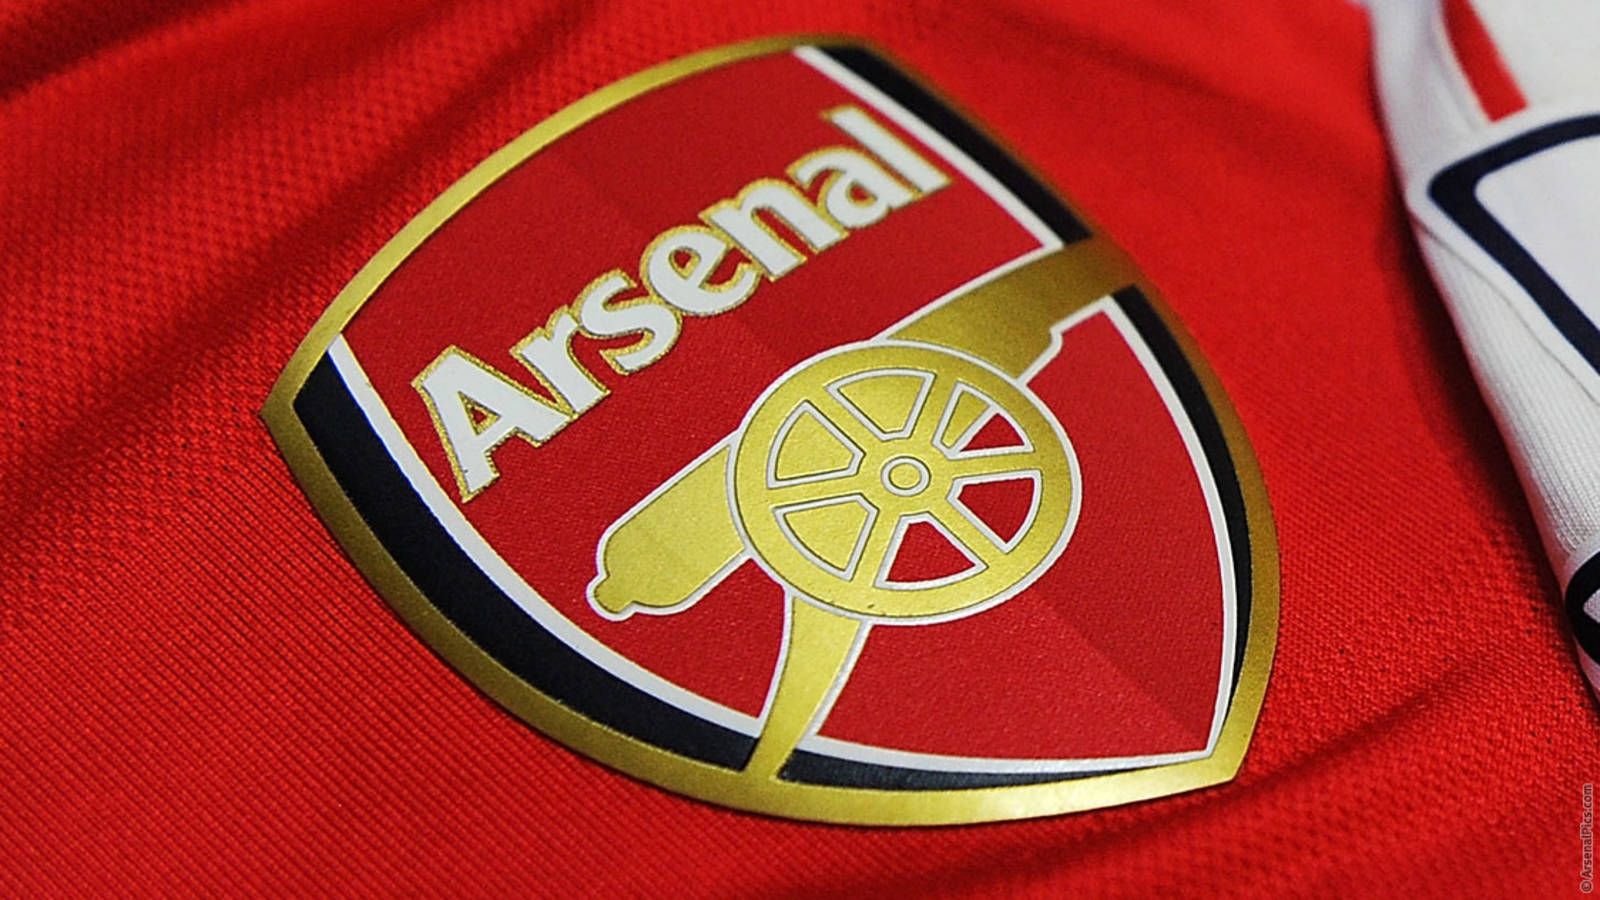 The Arsenal Crest